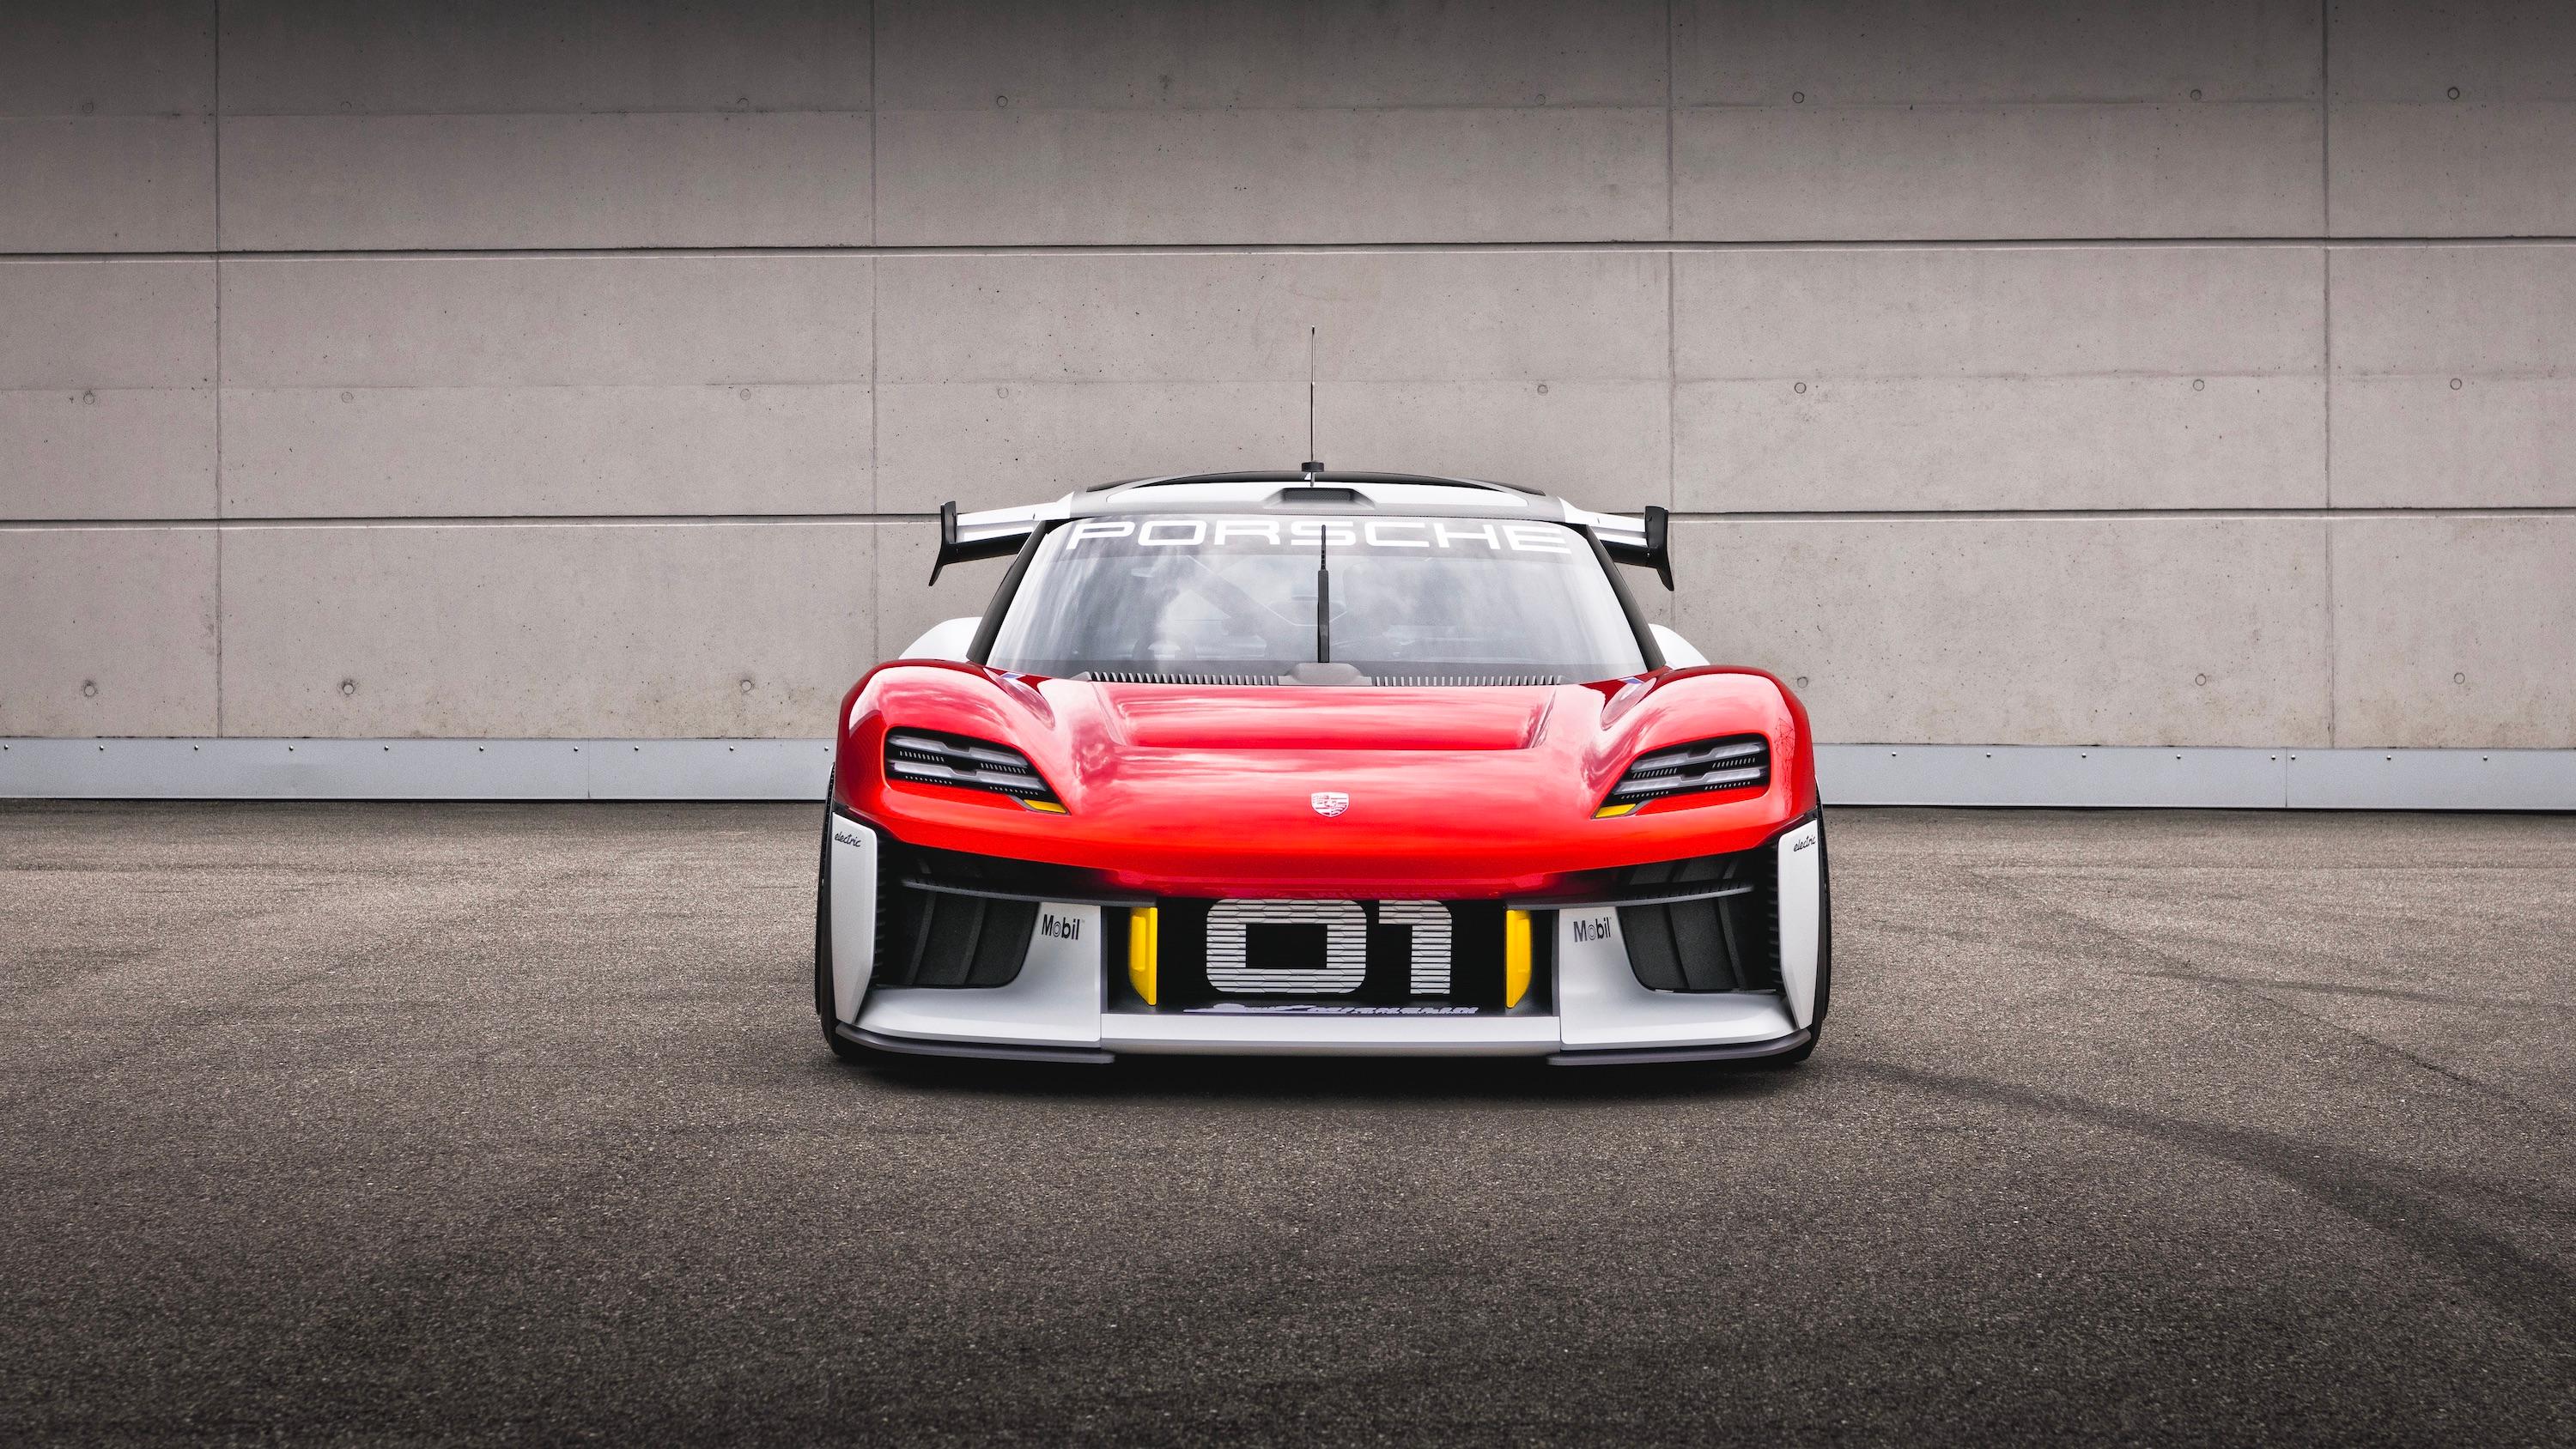 Porsche is trying to make racing more sustainable.